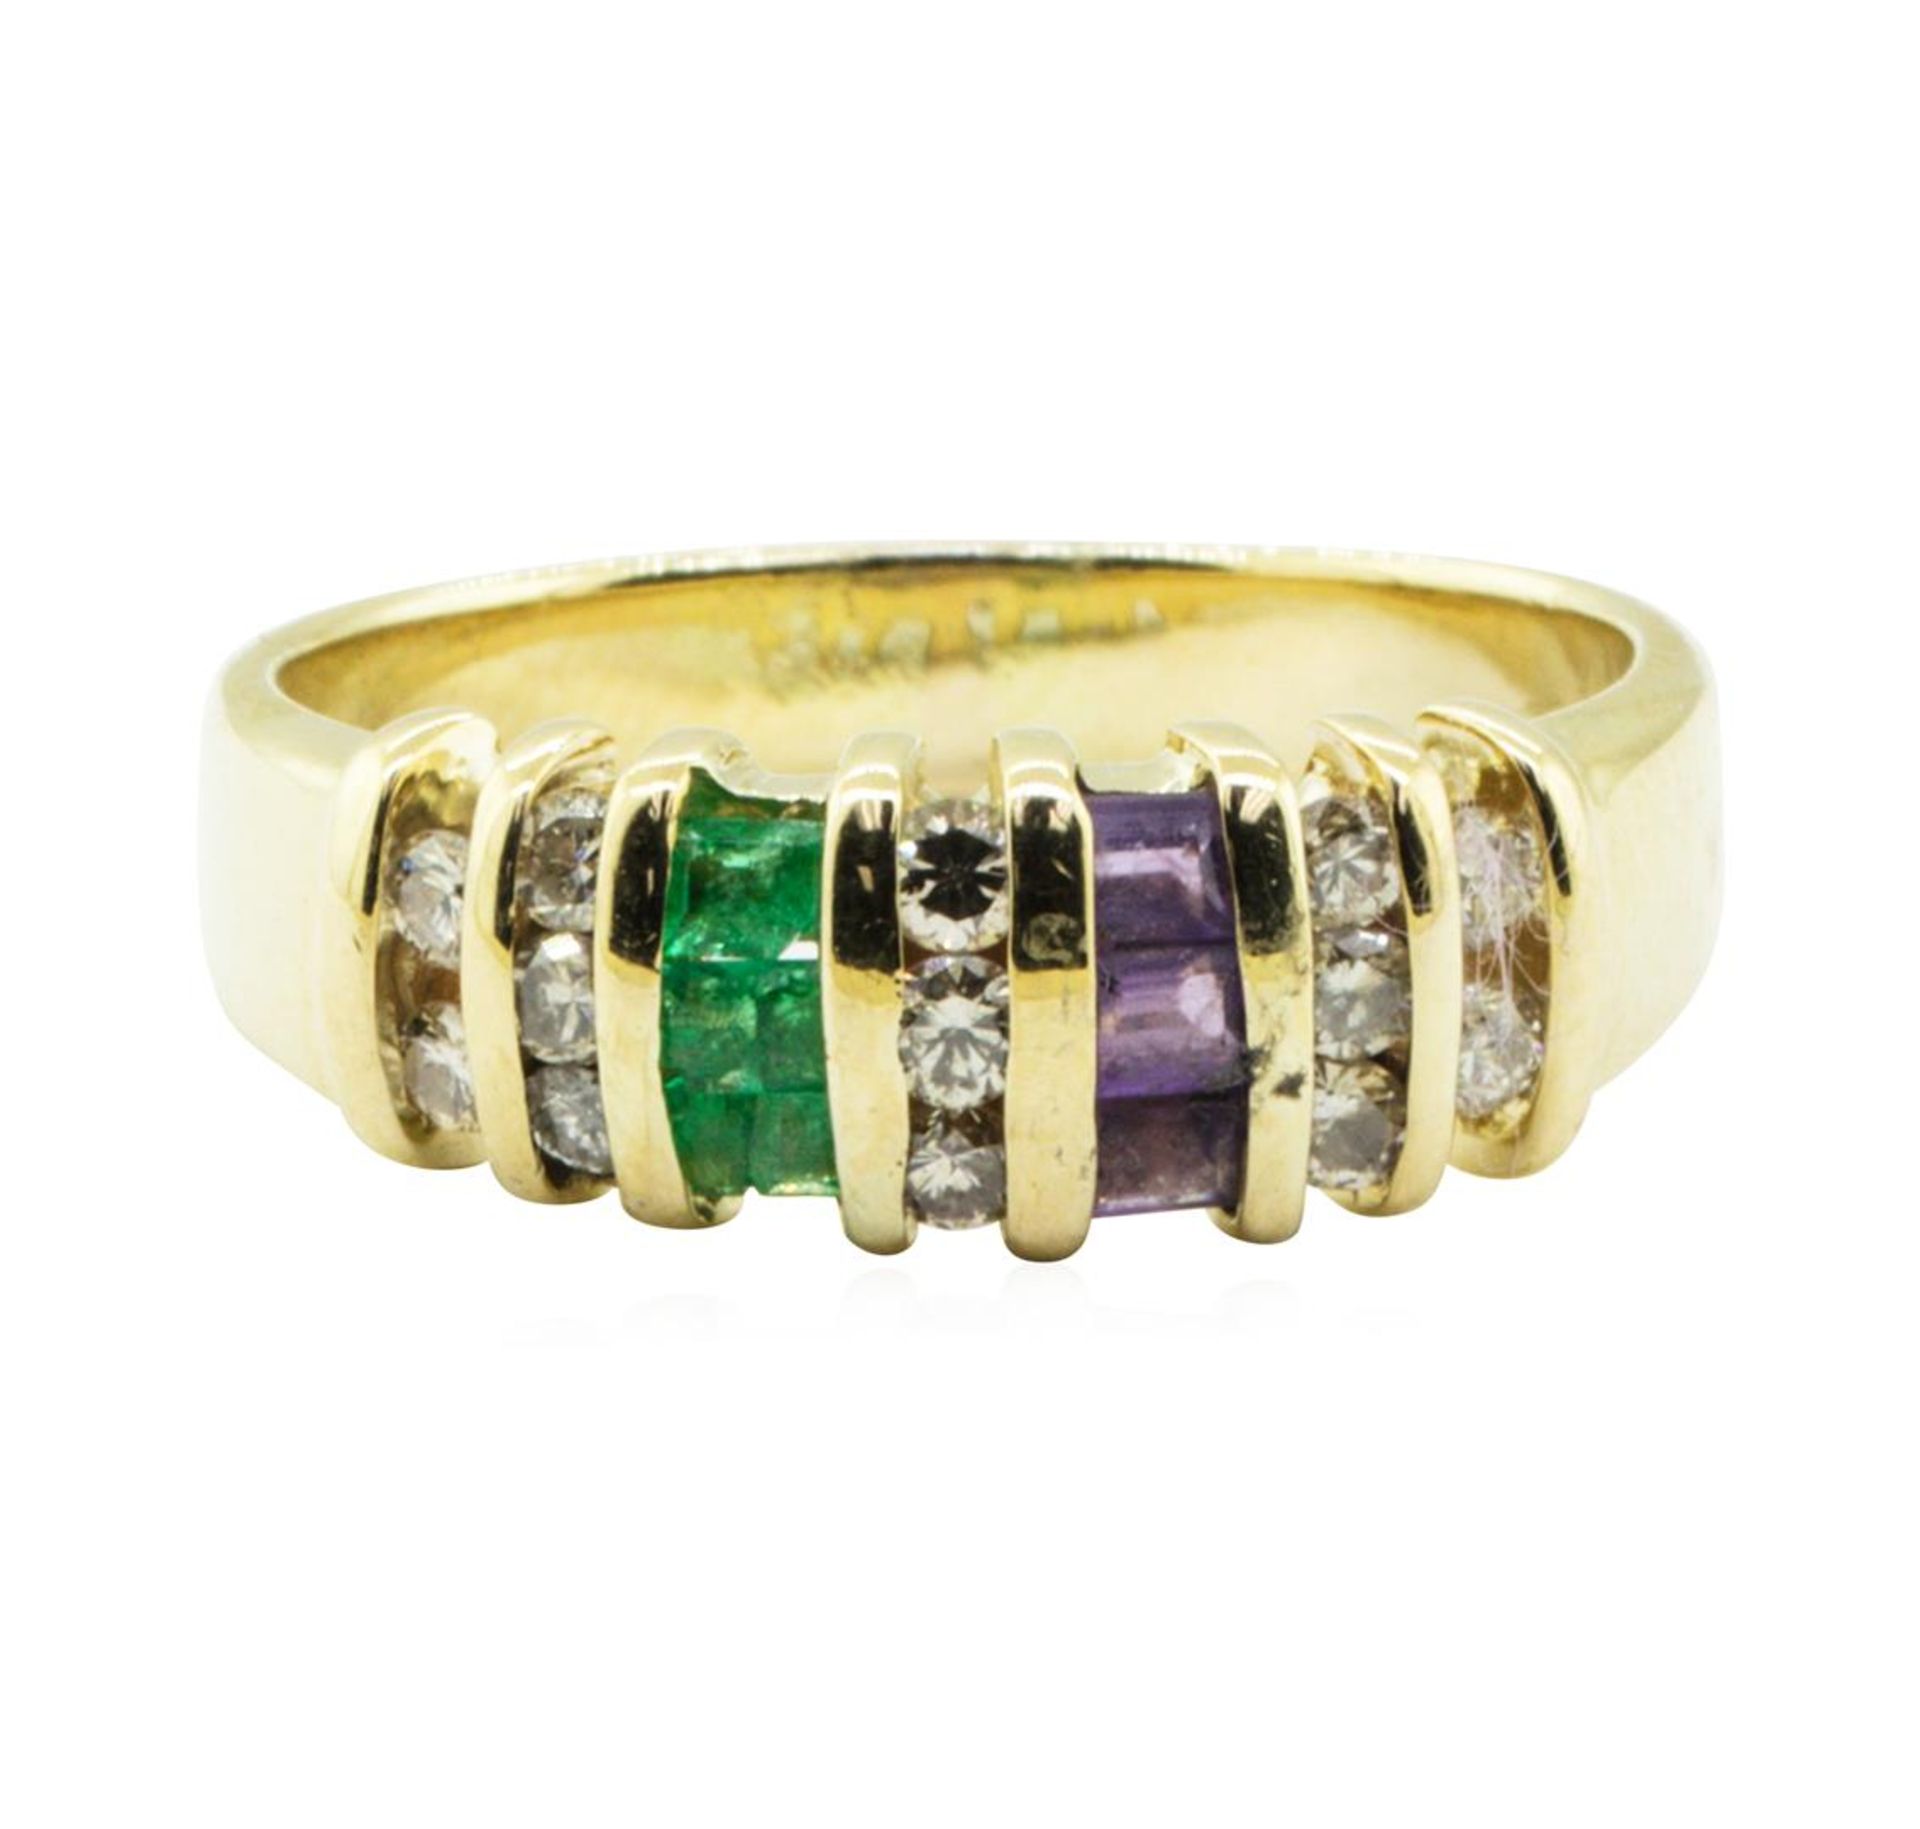 0.90 ctw Diamond, Amethyst, and Emerald Ring - 14KT Yellow Gold - Image 2 of 4